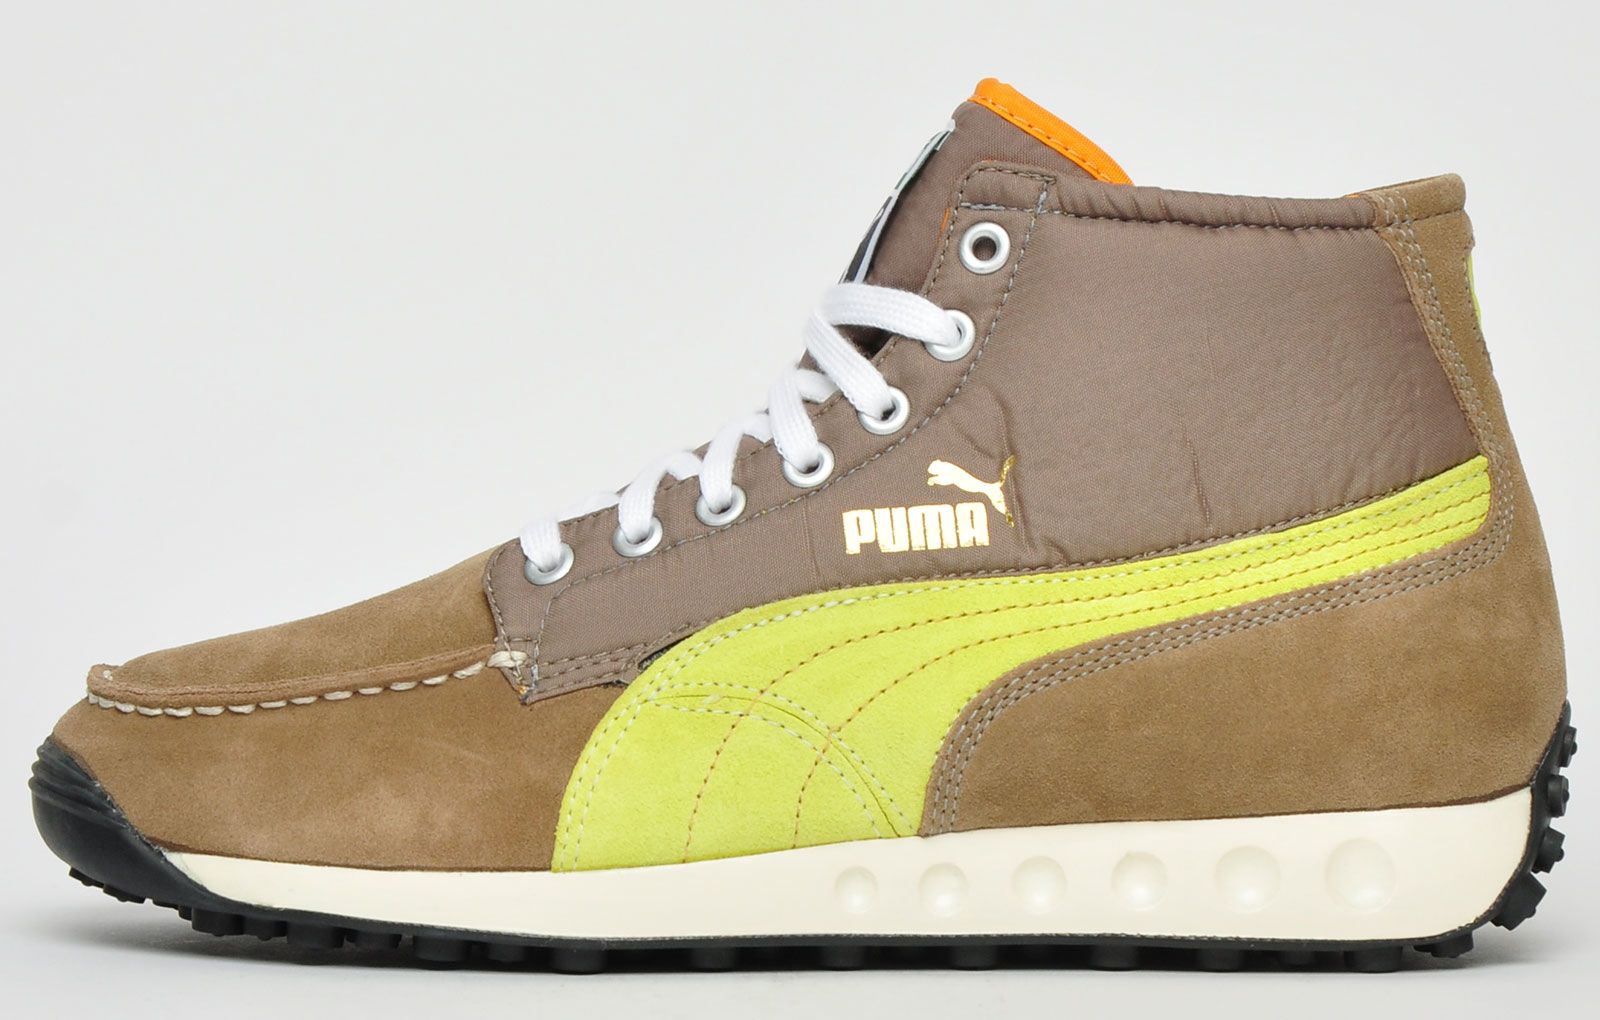 The Puma Easy Wing L Mashup is a fashionable and durable trainer boot that's perfect for the coming season. <p>Puma have adeptly transformed their popular Puma Easy Rider trainer into a stylish boot. They feature a quality nubuck leather nylon and synthetic mixed upper complimented with contrast metal eyelets and iconic Puma Formstripe branding adorned to the side of the upper for instant brand recognition.</p> <p>These trainers are further enhanced with a premium cushy midsole and a lug treaded outsole designed to offer supreme traction across a multitude of surfaces </p> <p>- Premium nubuck leather / nylon / synthetic mix upper </p> <p>- Trainer boot construction </p> <p>- Secure up-front lace up closure </p> <p>- Contrast metal eyelets</p> <p>- Supportive and cushioned EVA midsole </p> <p>- Durable lug treaded rubber outsole offers grip </p> <p>- Puma branding throughout </p>